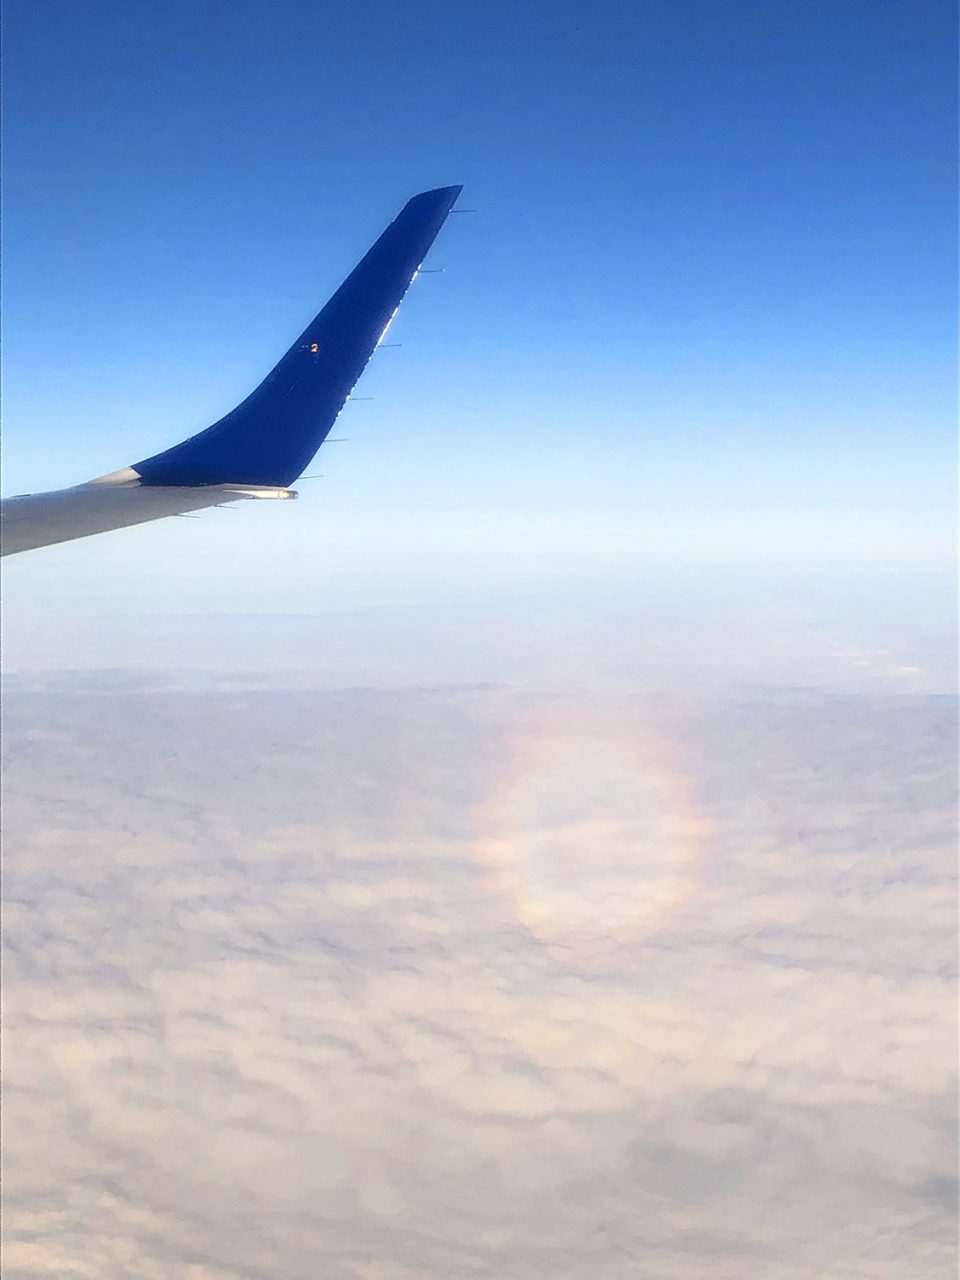 iPhone photograph of a fully circular rainbow known as a "glory." Photograph by Keith Dotson.